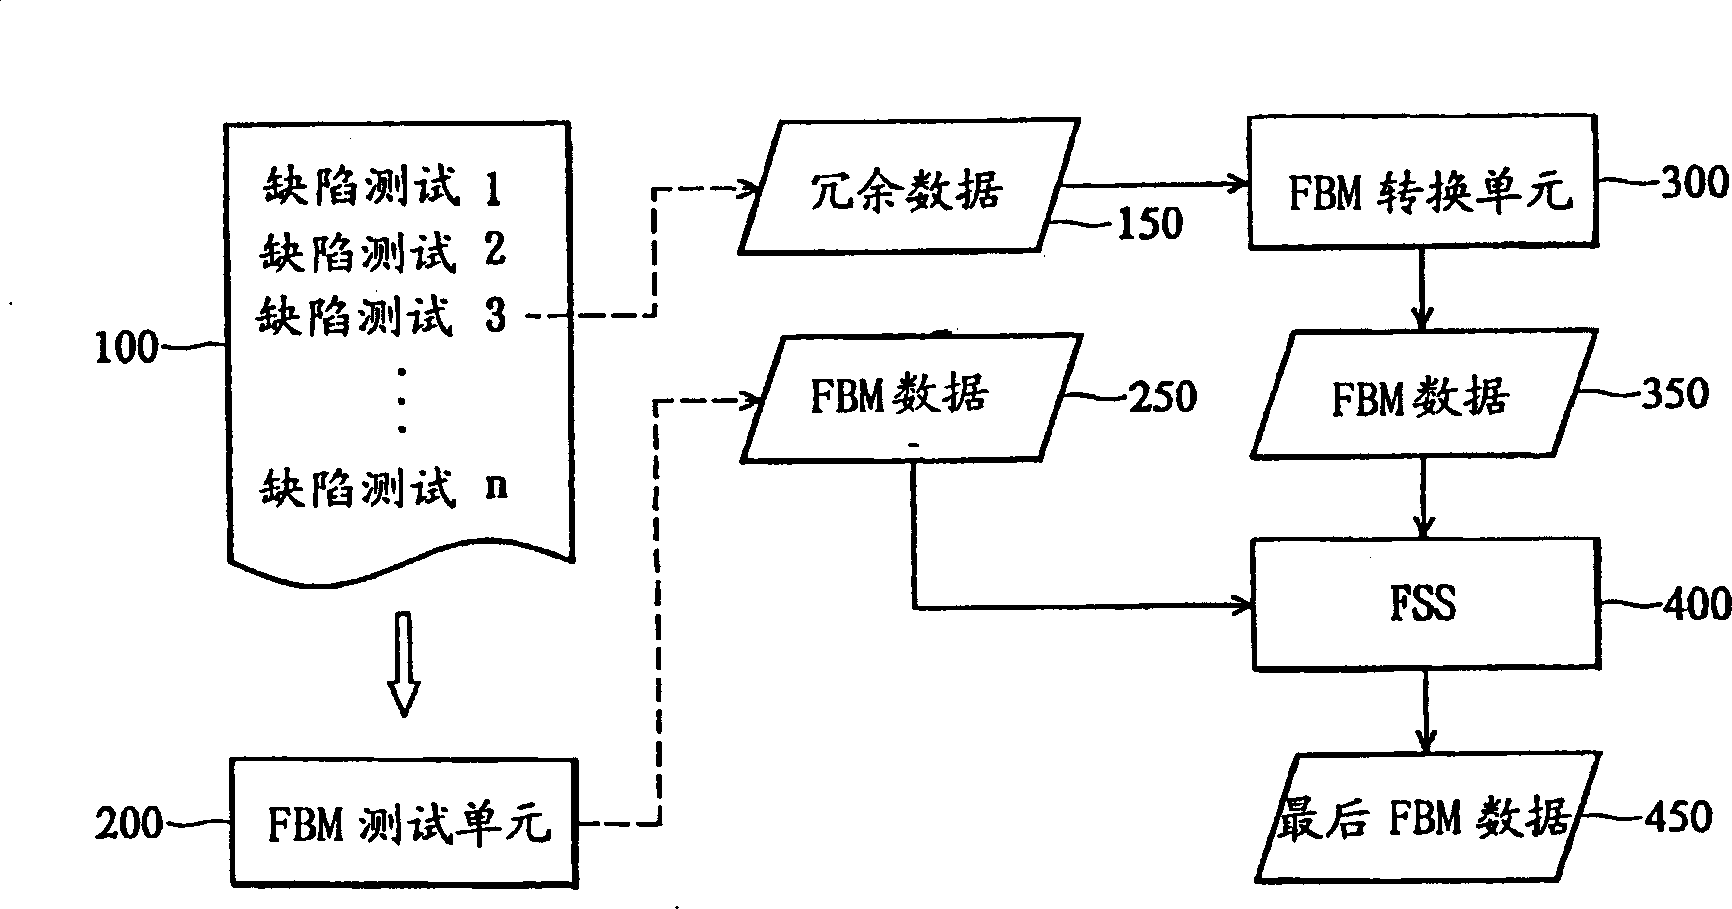 Method and system for inspecting semiconductor defect